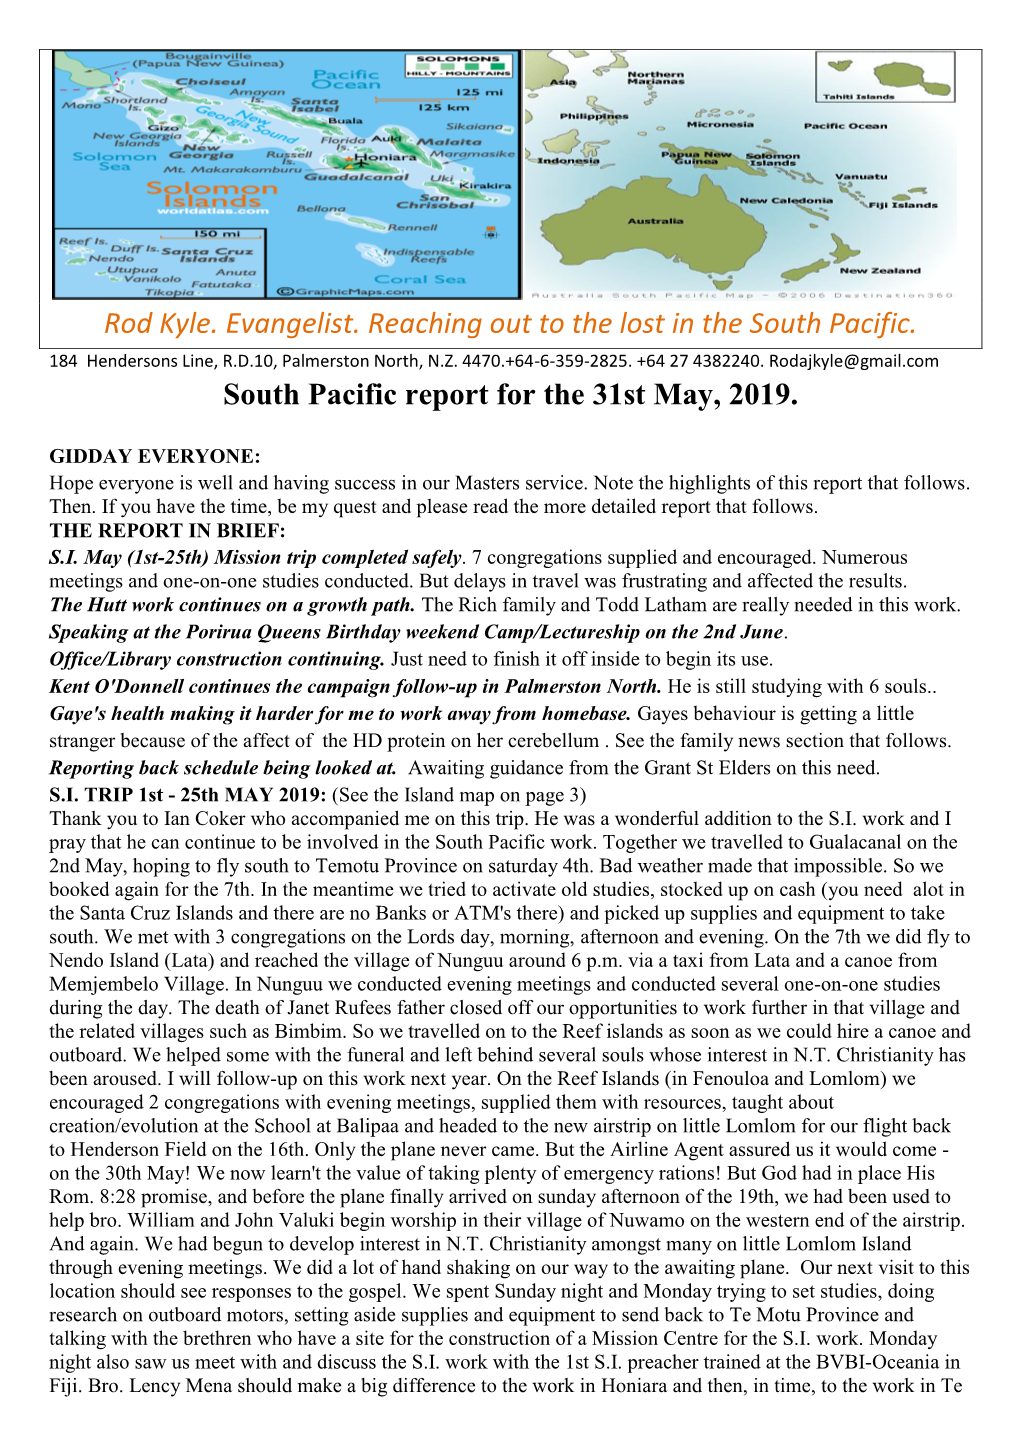 South Pacific Report for the 31St May, 2019